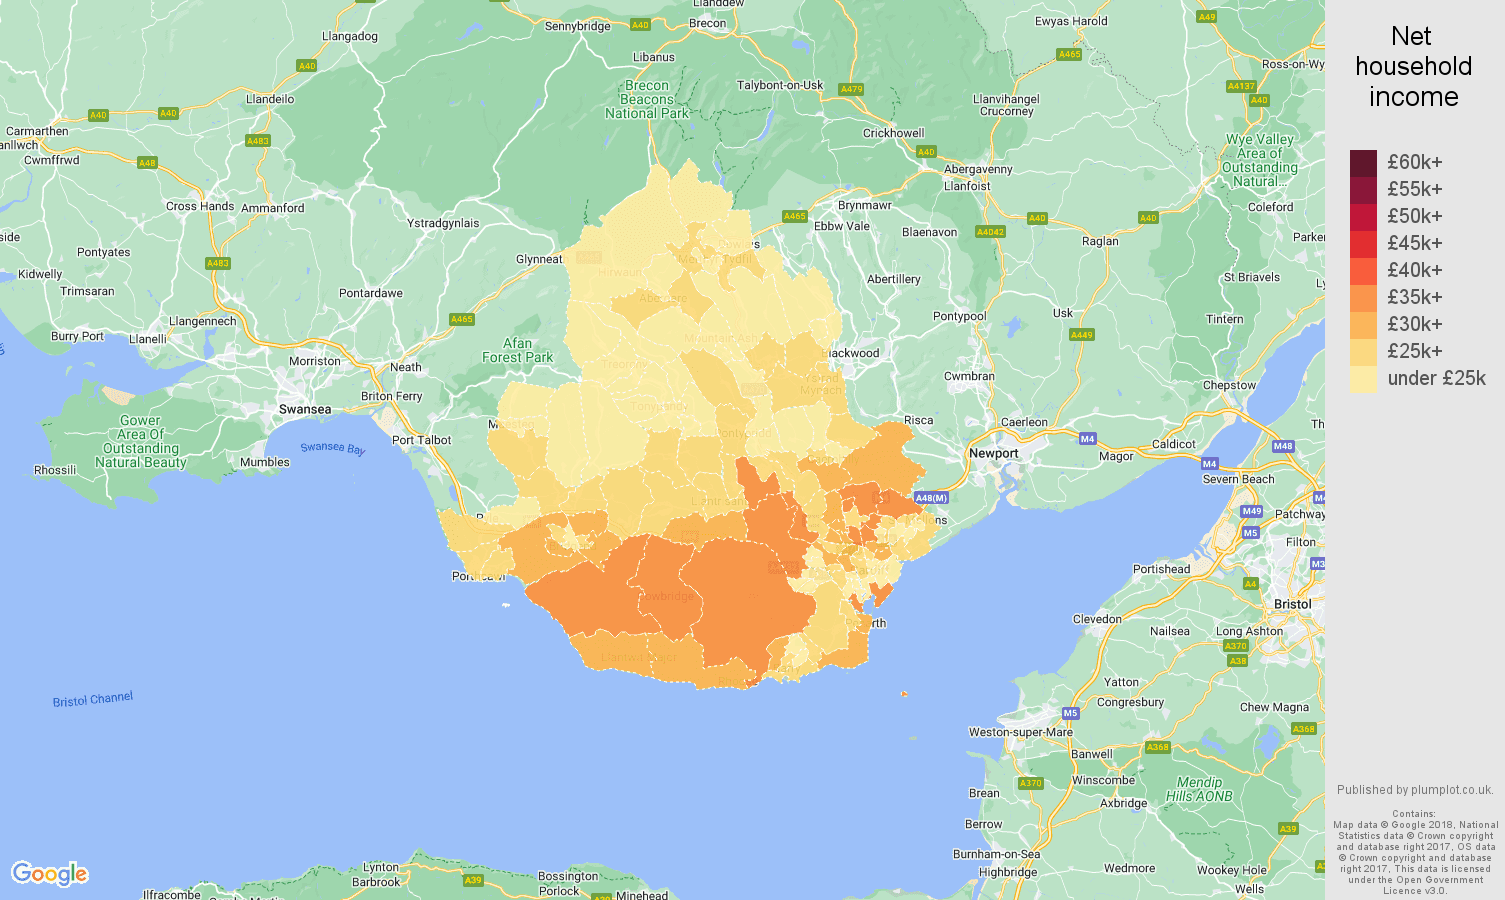 Cardiff net household income map